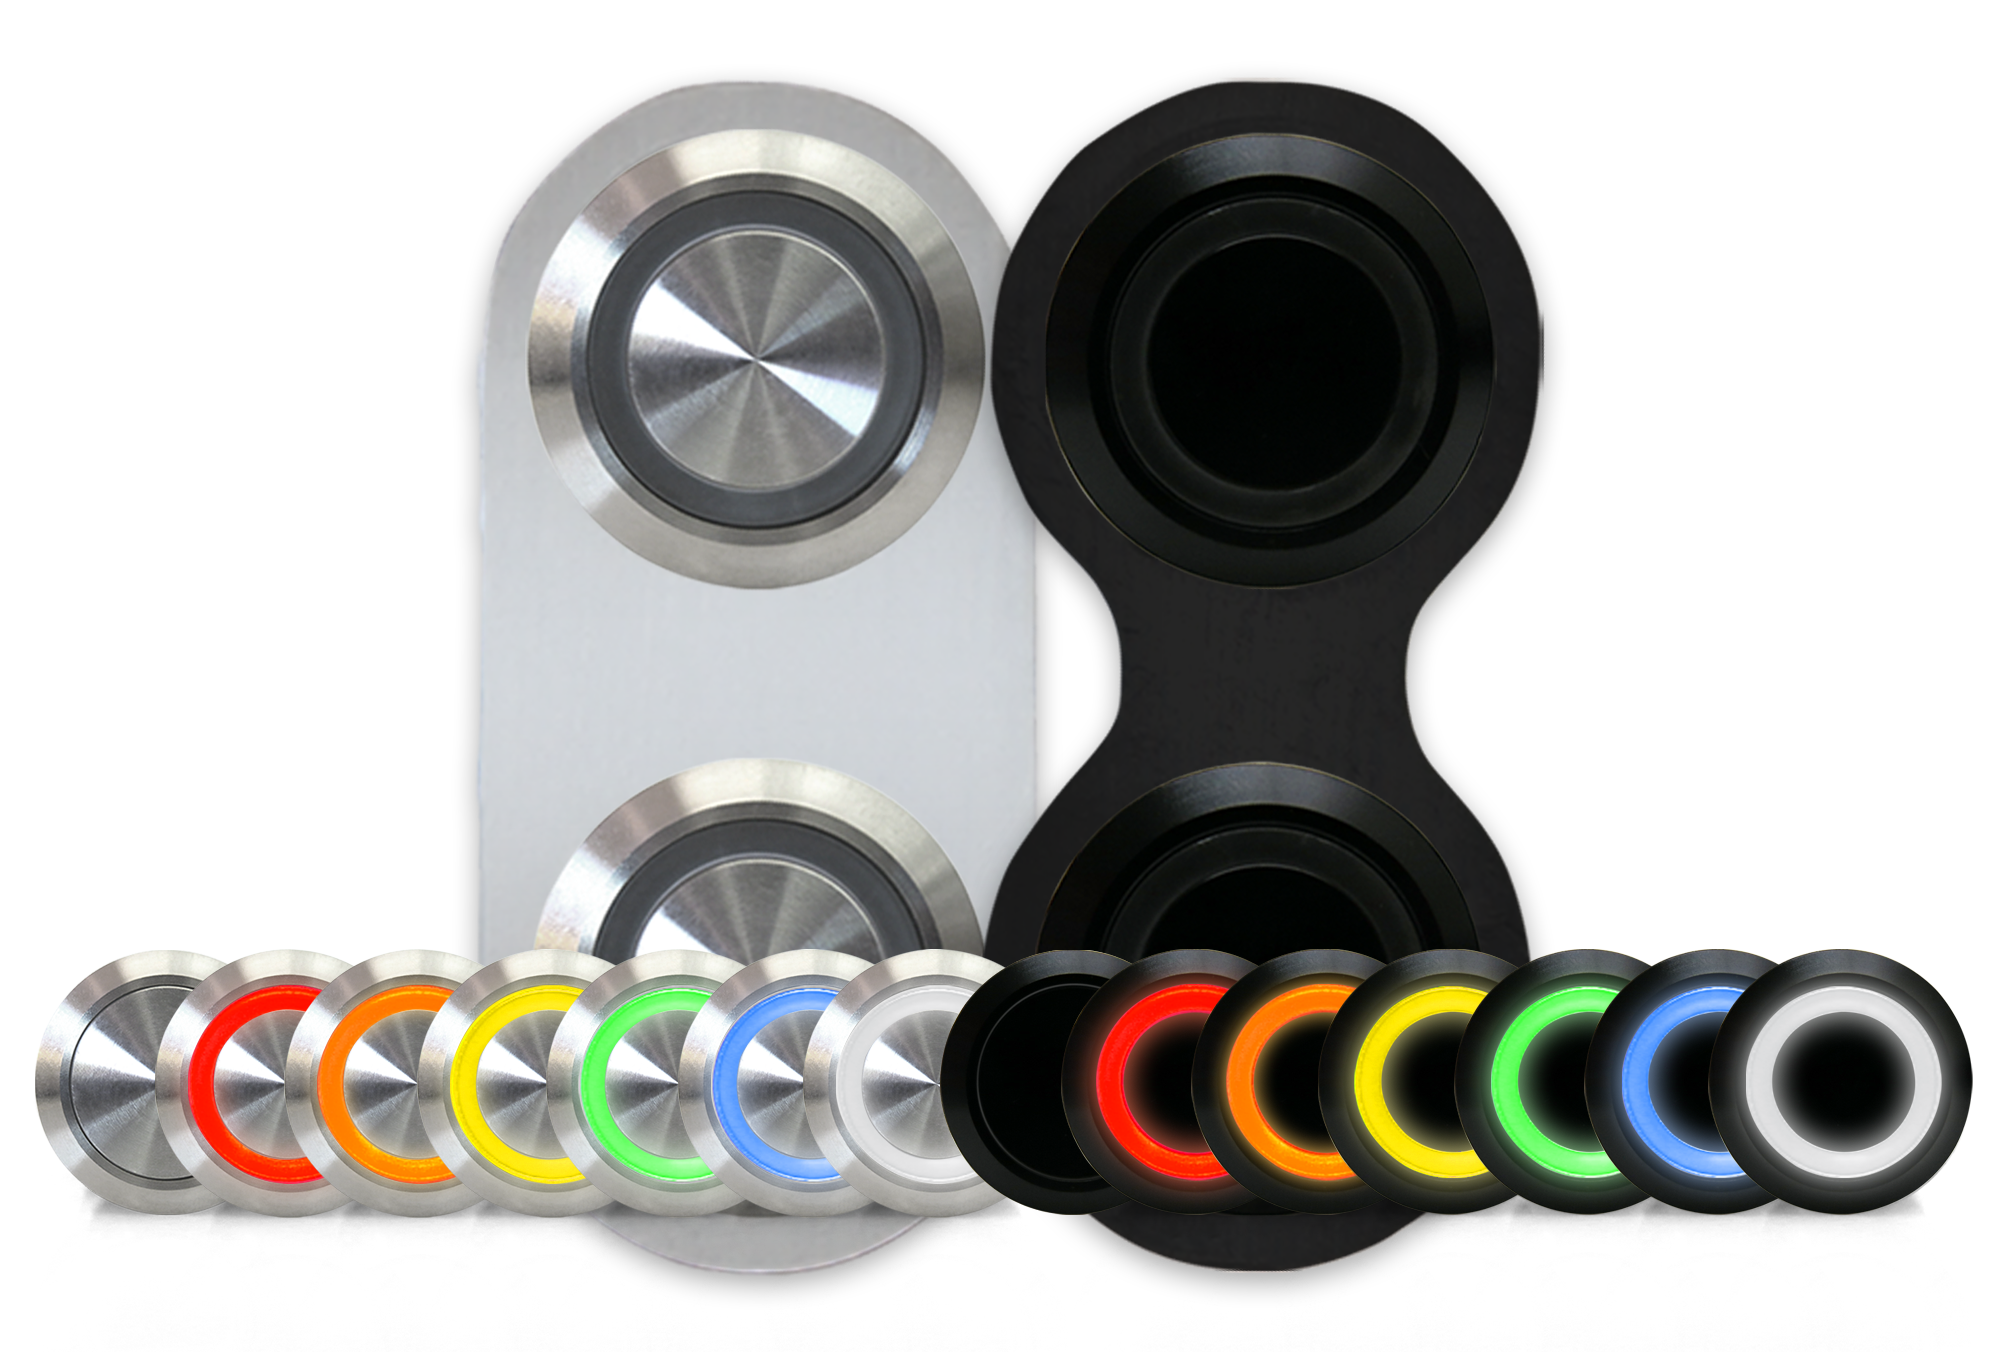 Billet Switches in Silver and Black with Illumination Colors